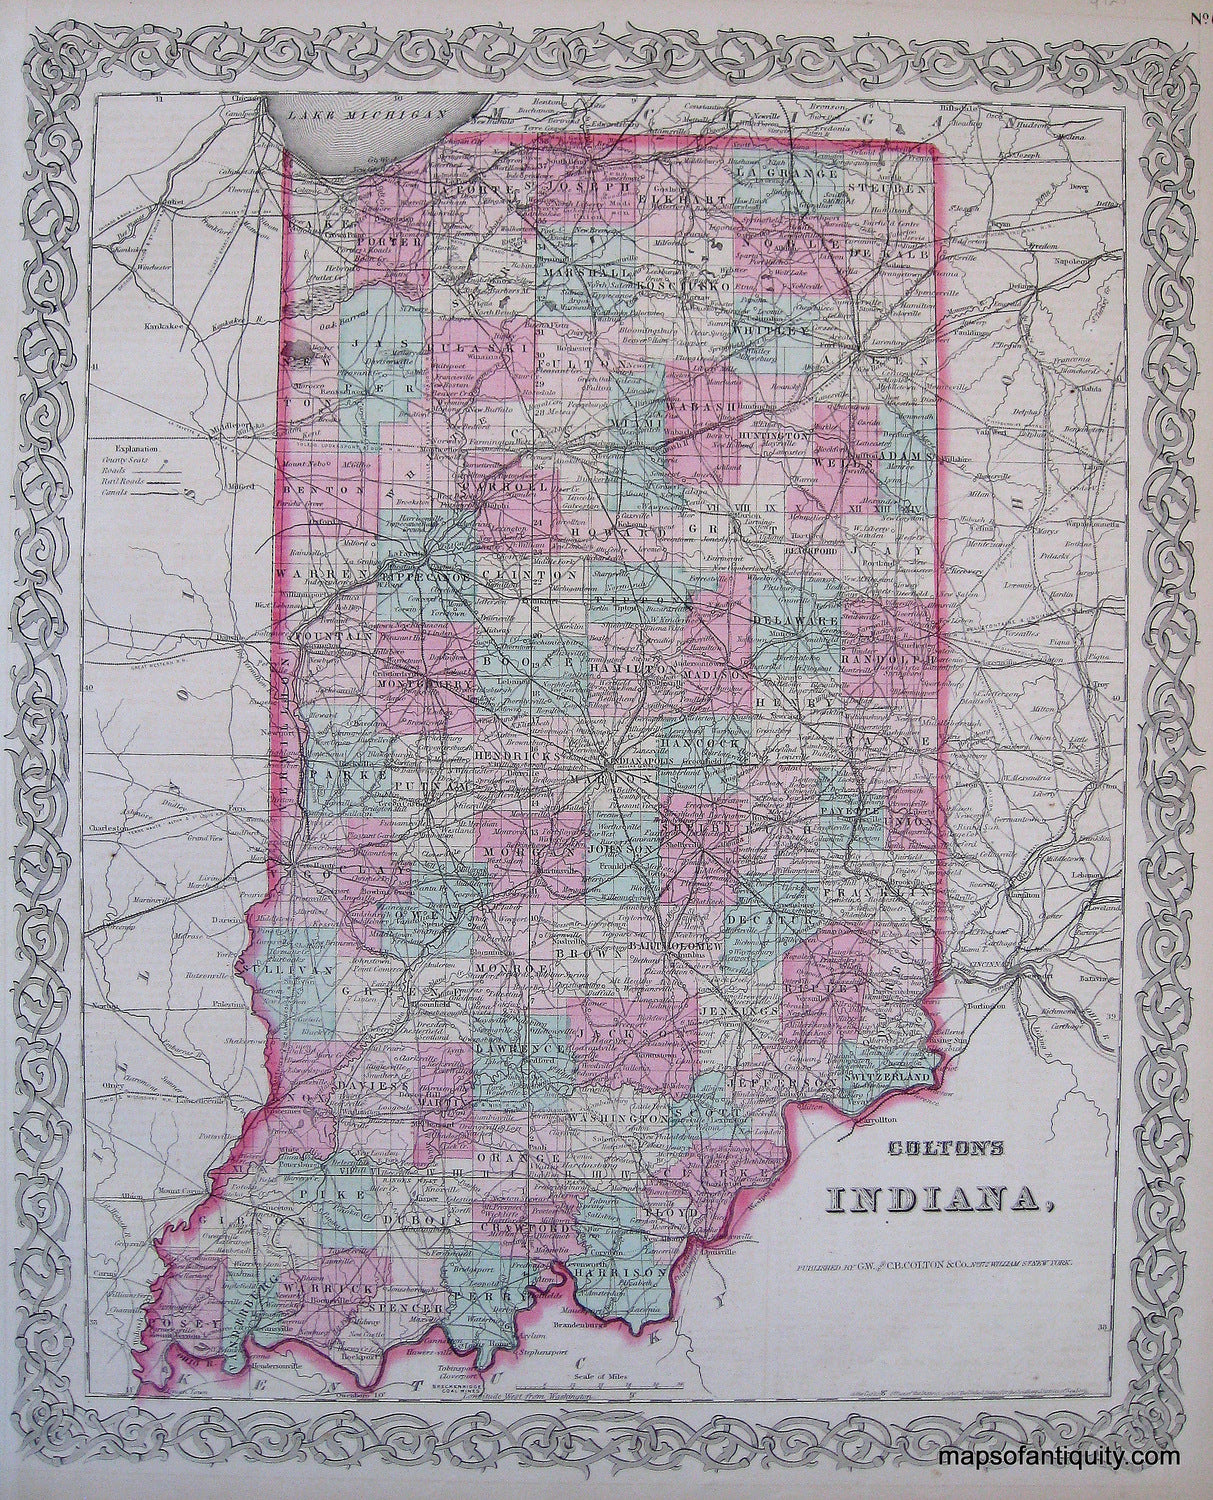 Antique-Hand-Colored-Map-Colton's-Indiana-United-States-Indiana-1871-Colton-Maps-Of-Antiquity